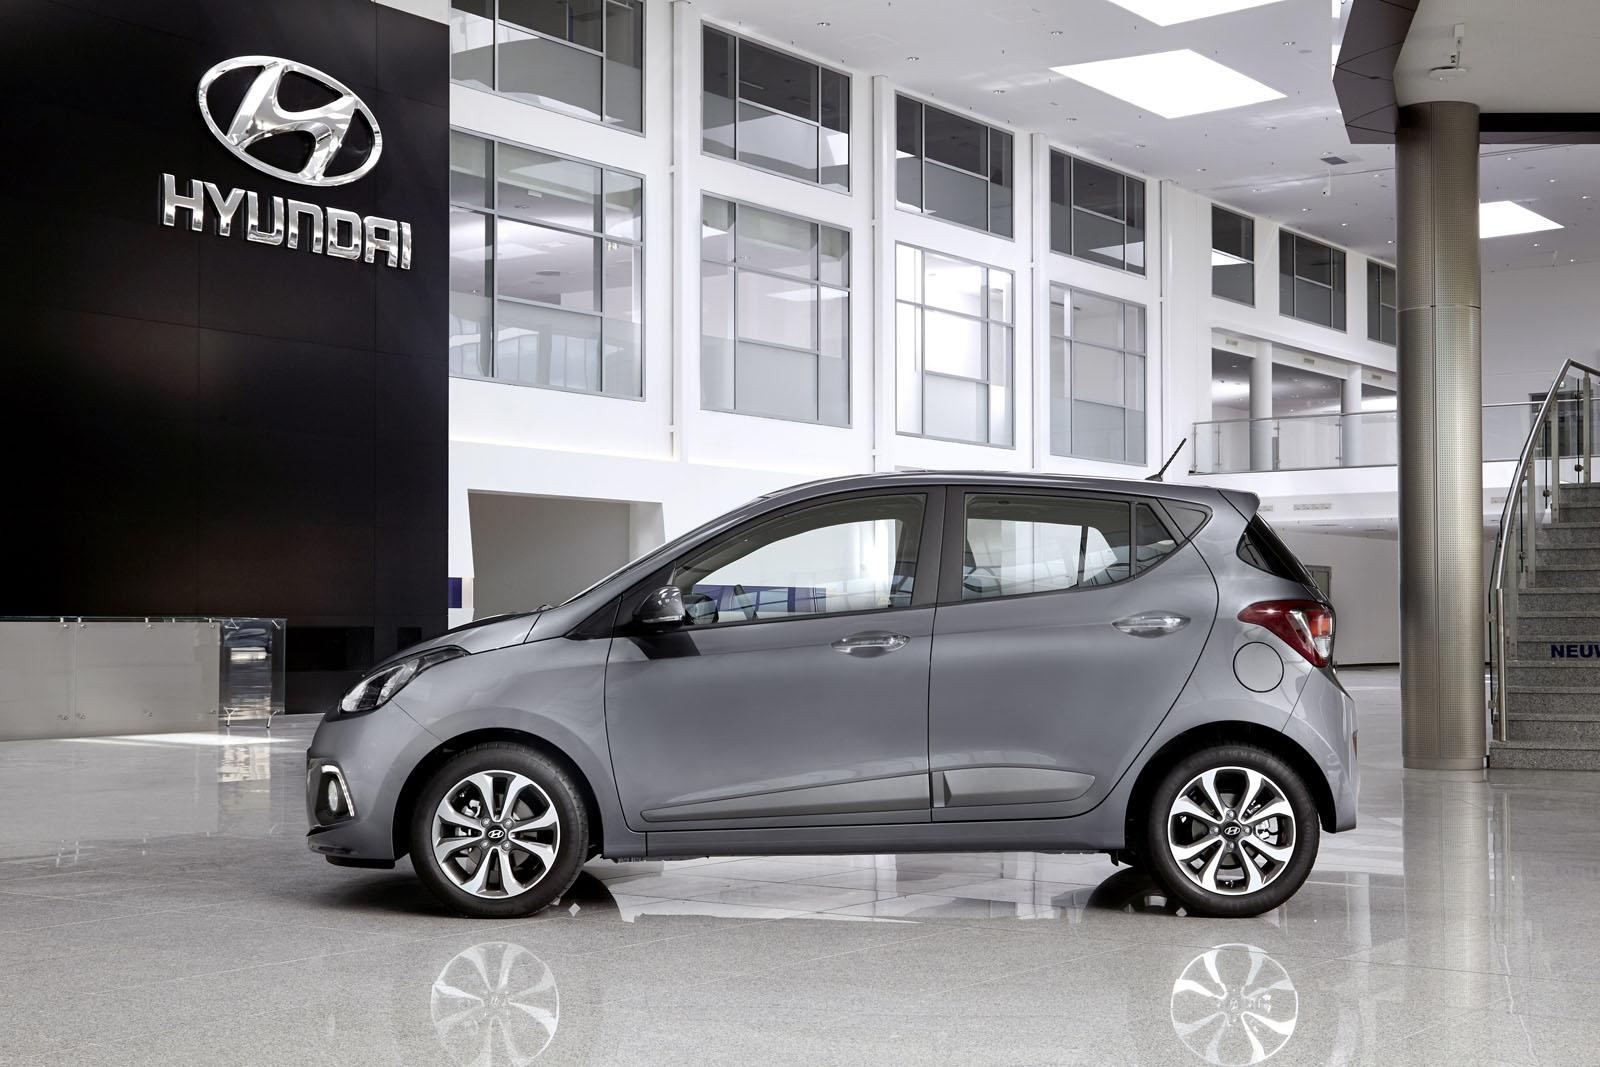 Hyundai i10 2014 photo 103576 pictures at high resolution